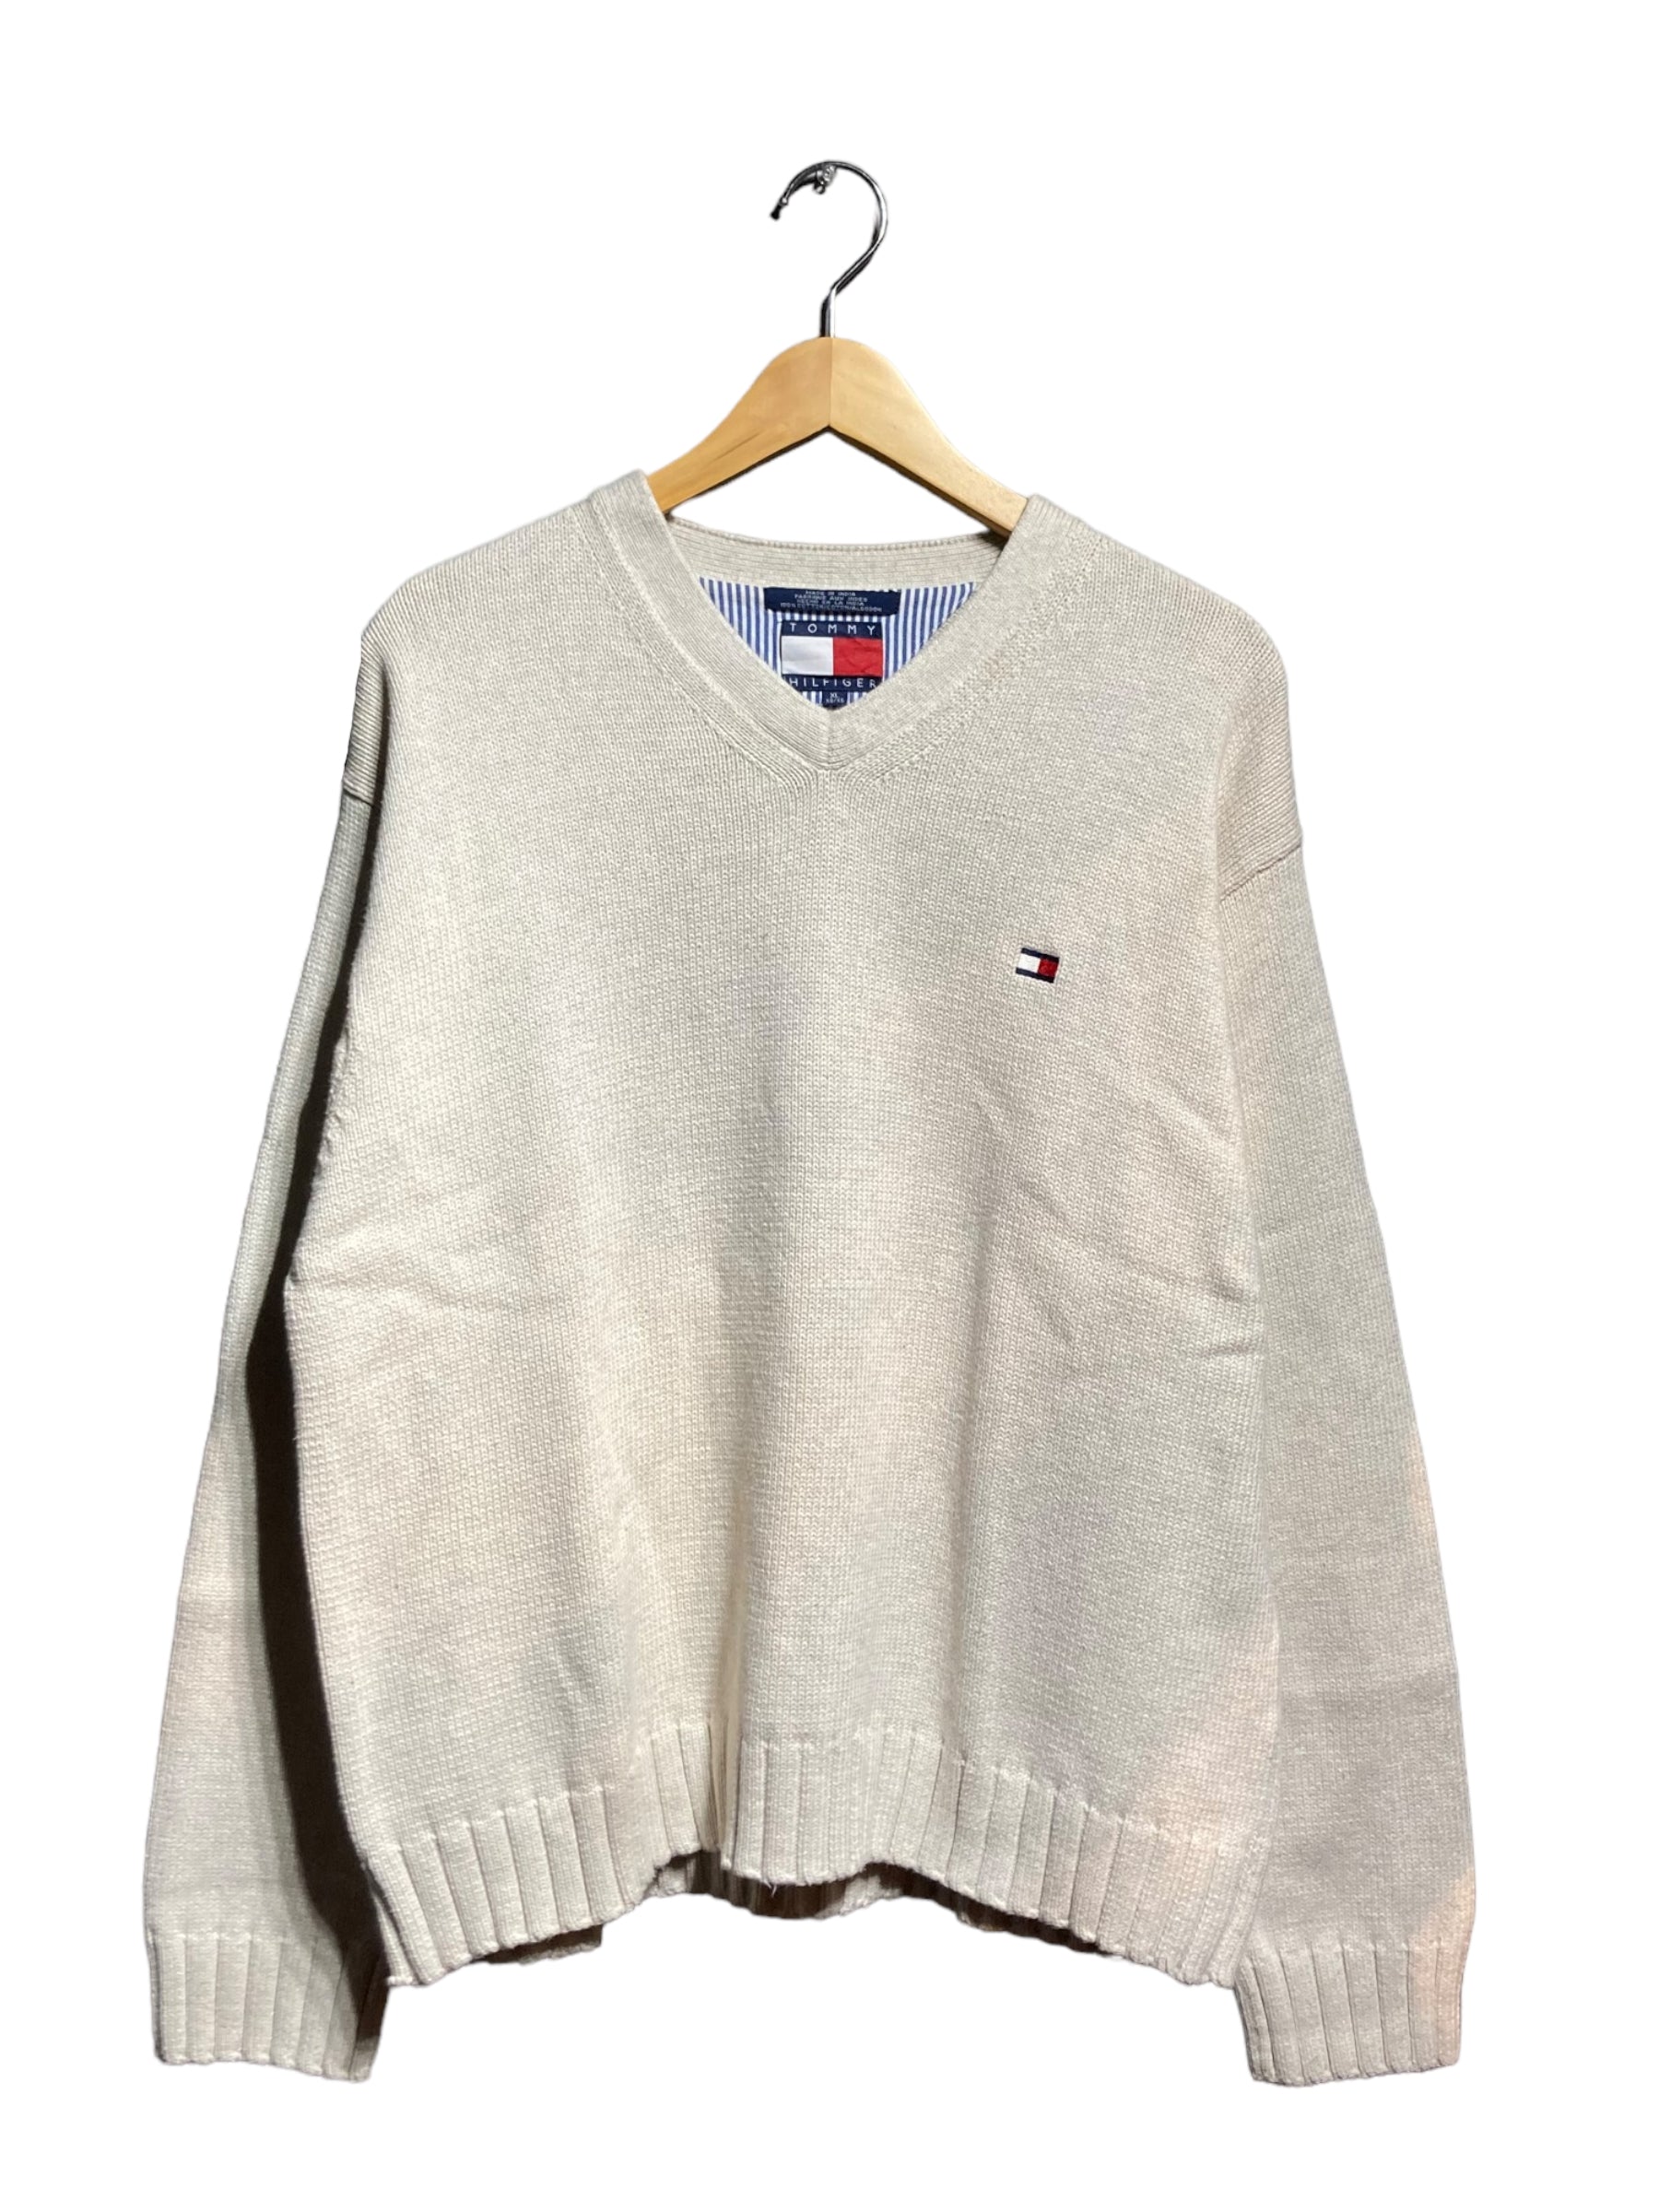 90s TOMMY HILFIGER トミートミーヒルフィガー knit sweater